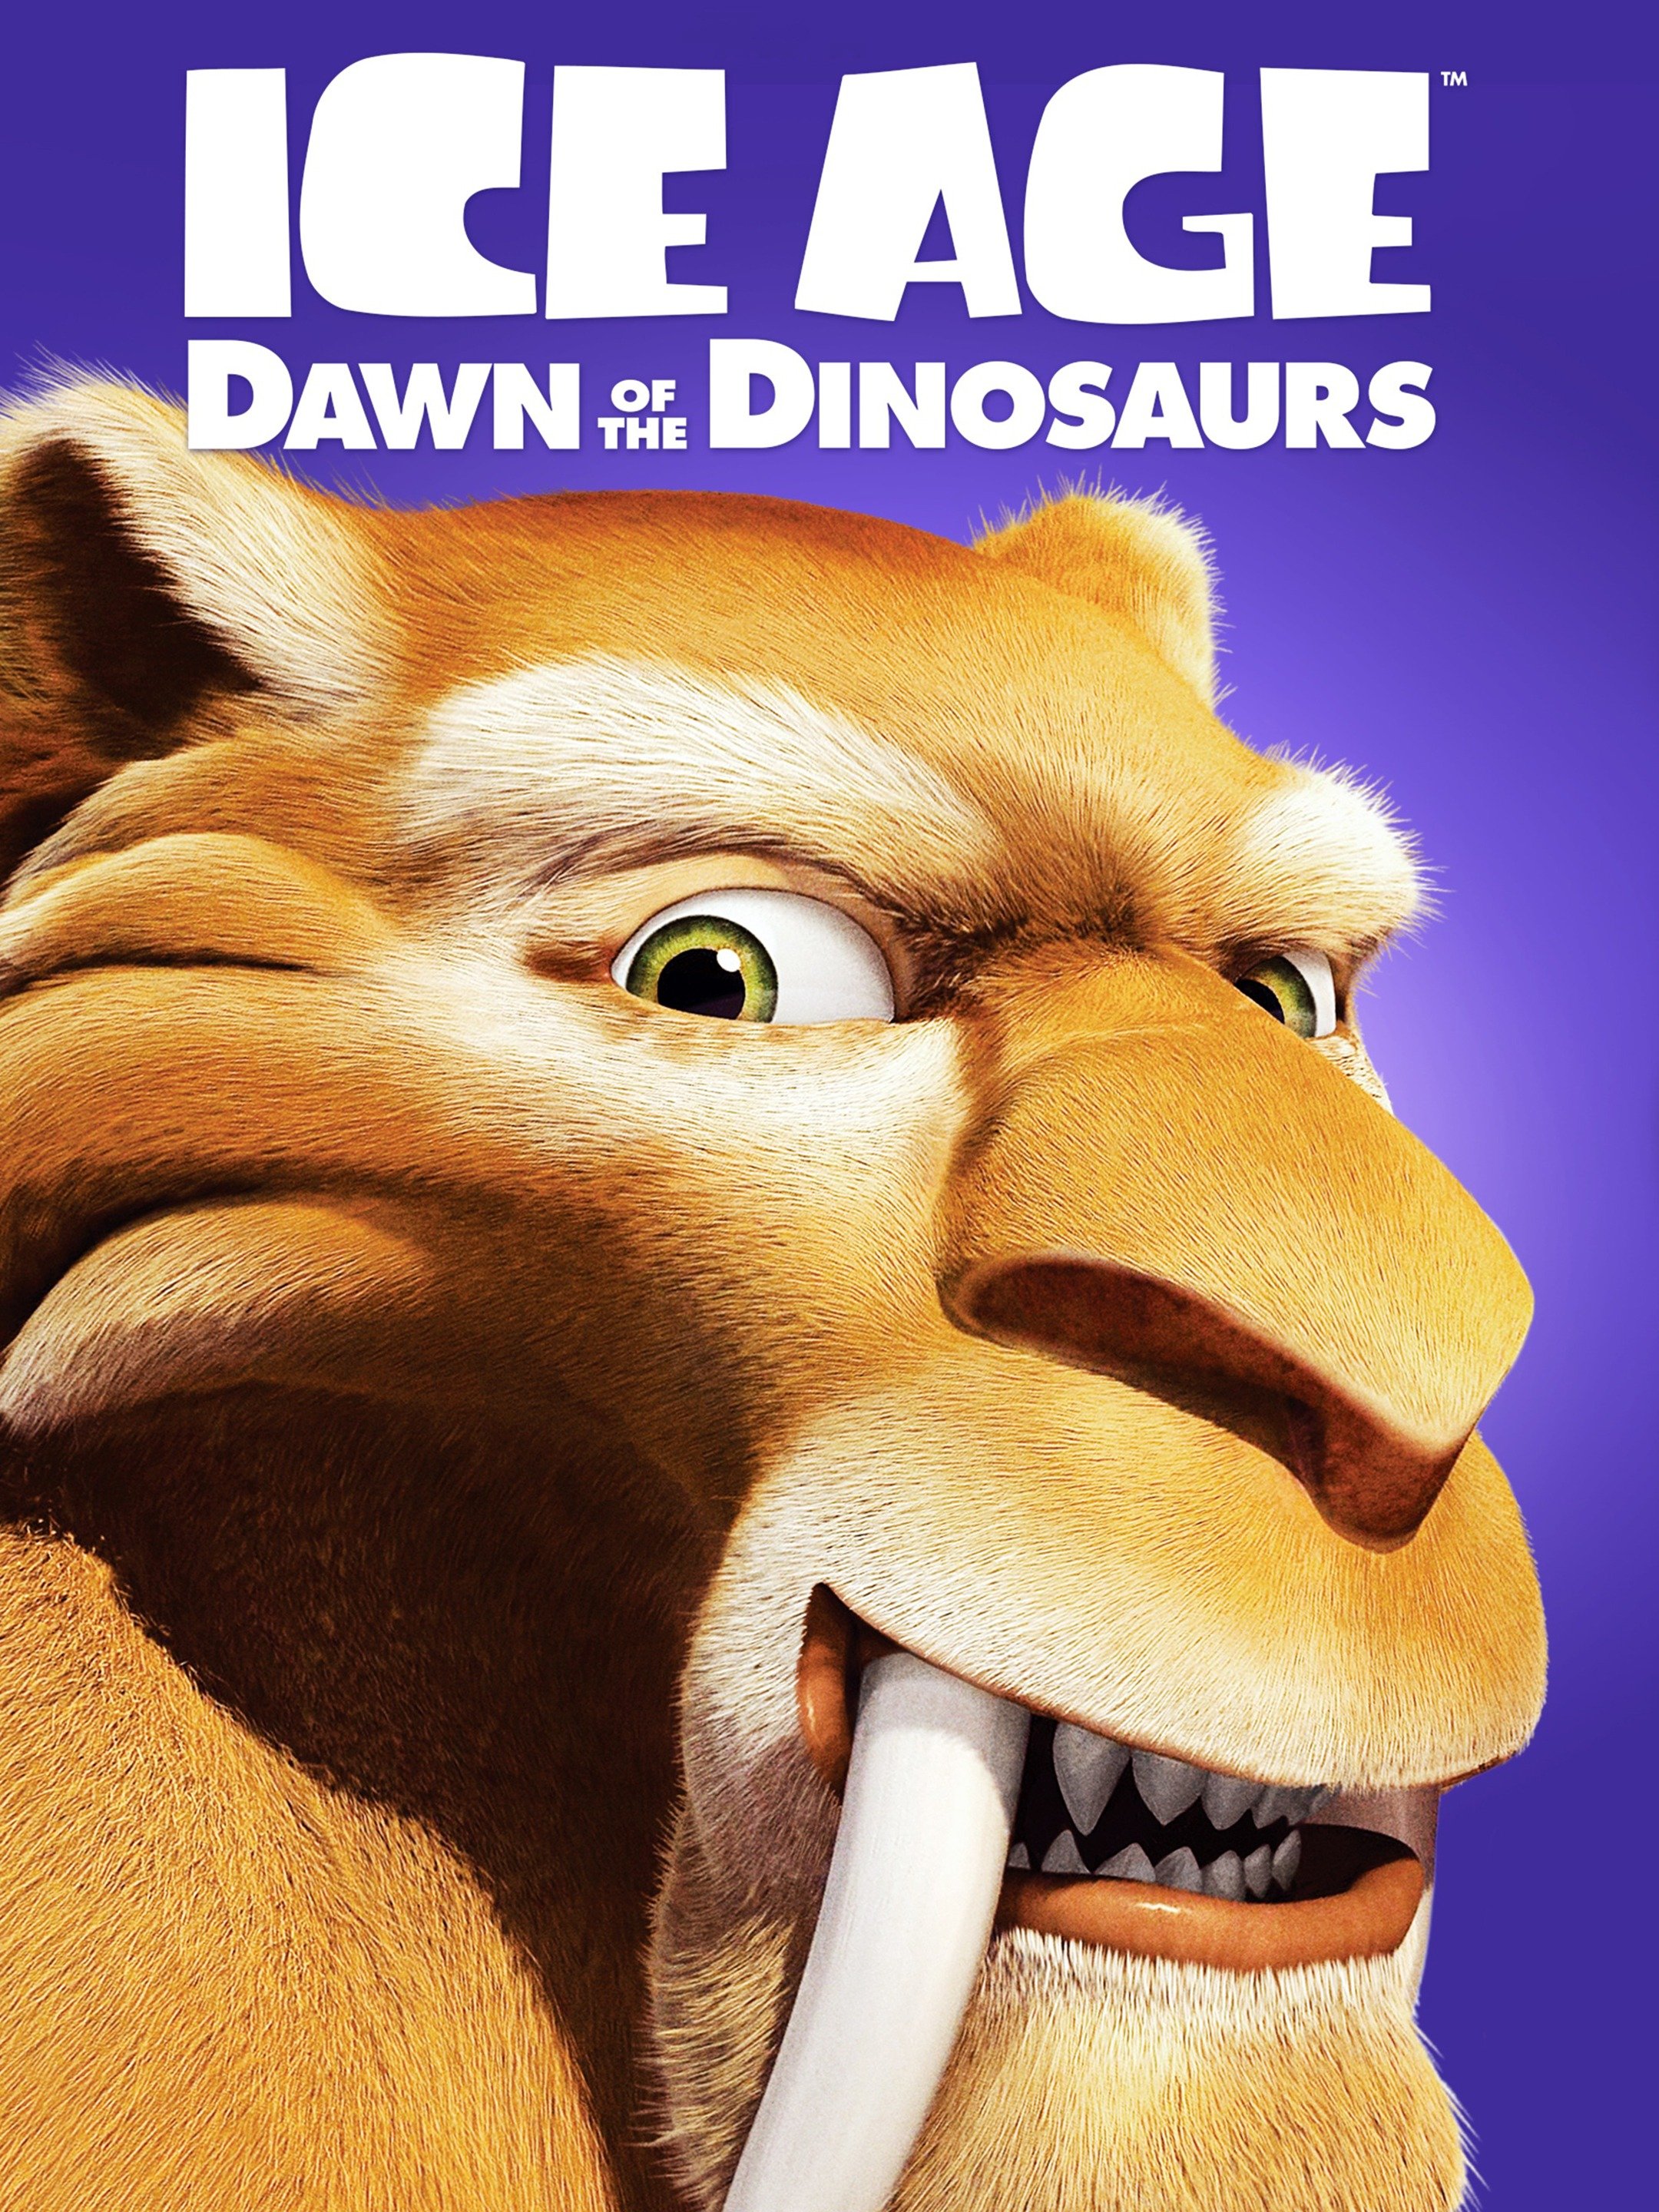 Ice Age: Dawn of the Dinosaurs instaling